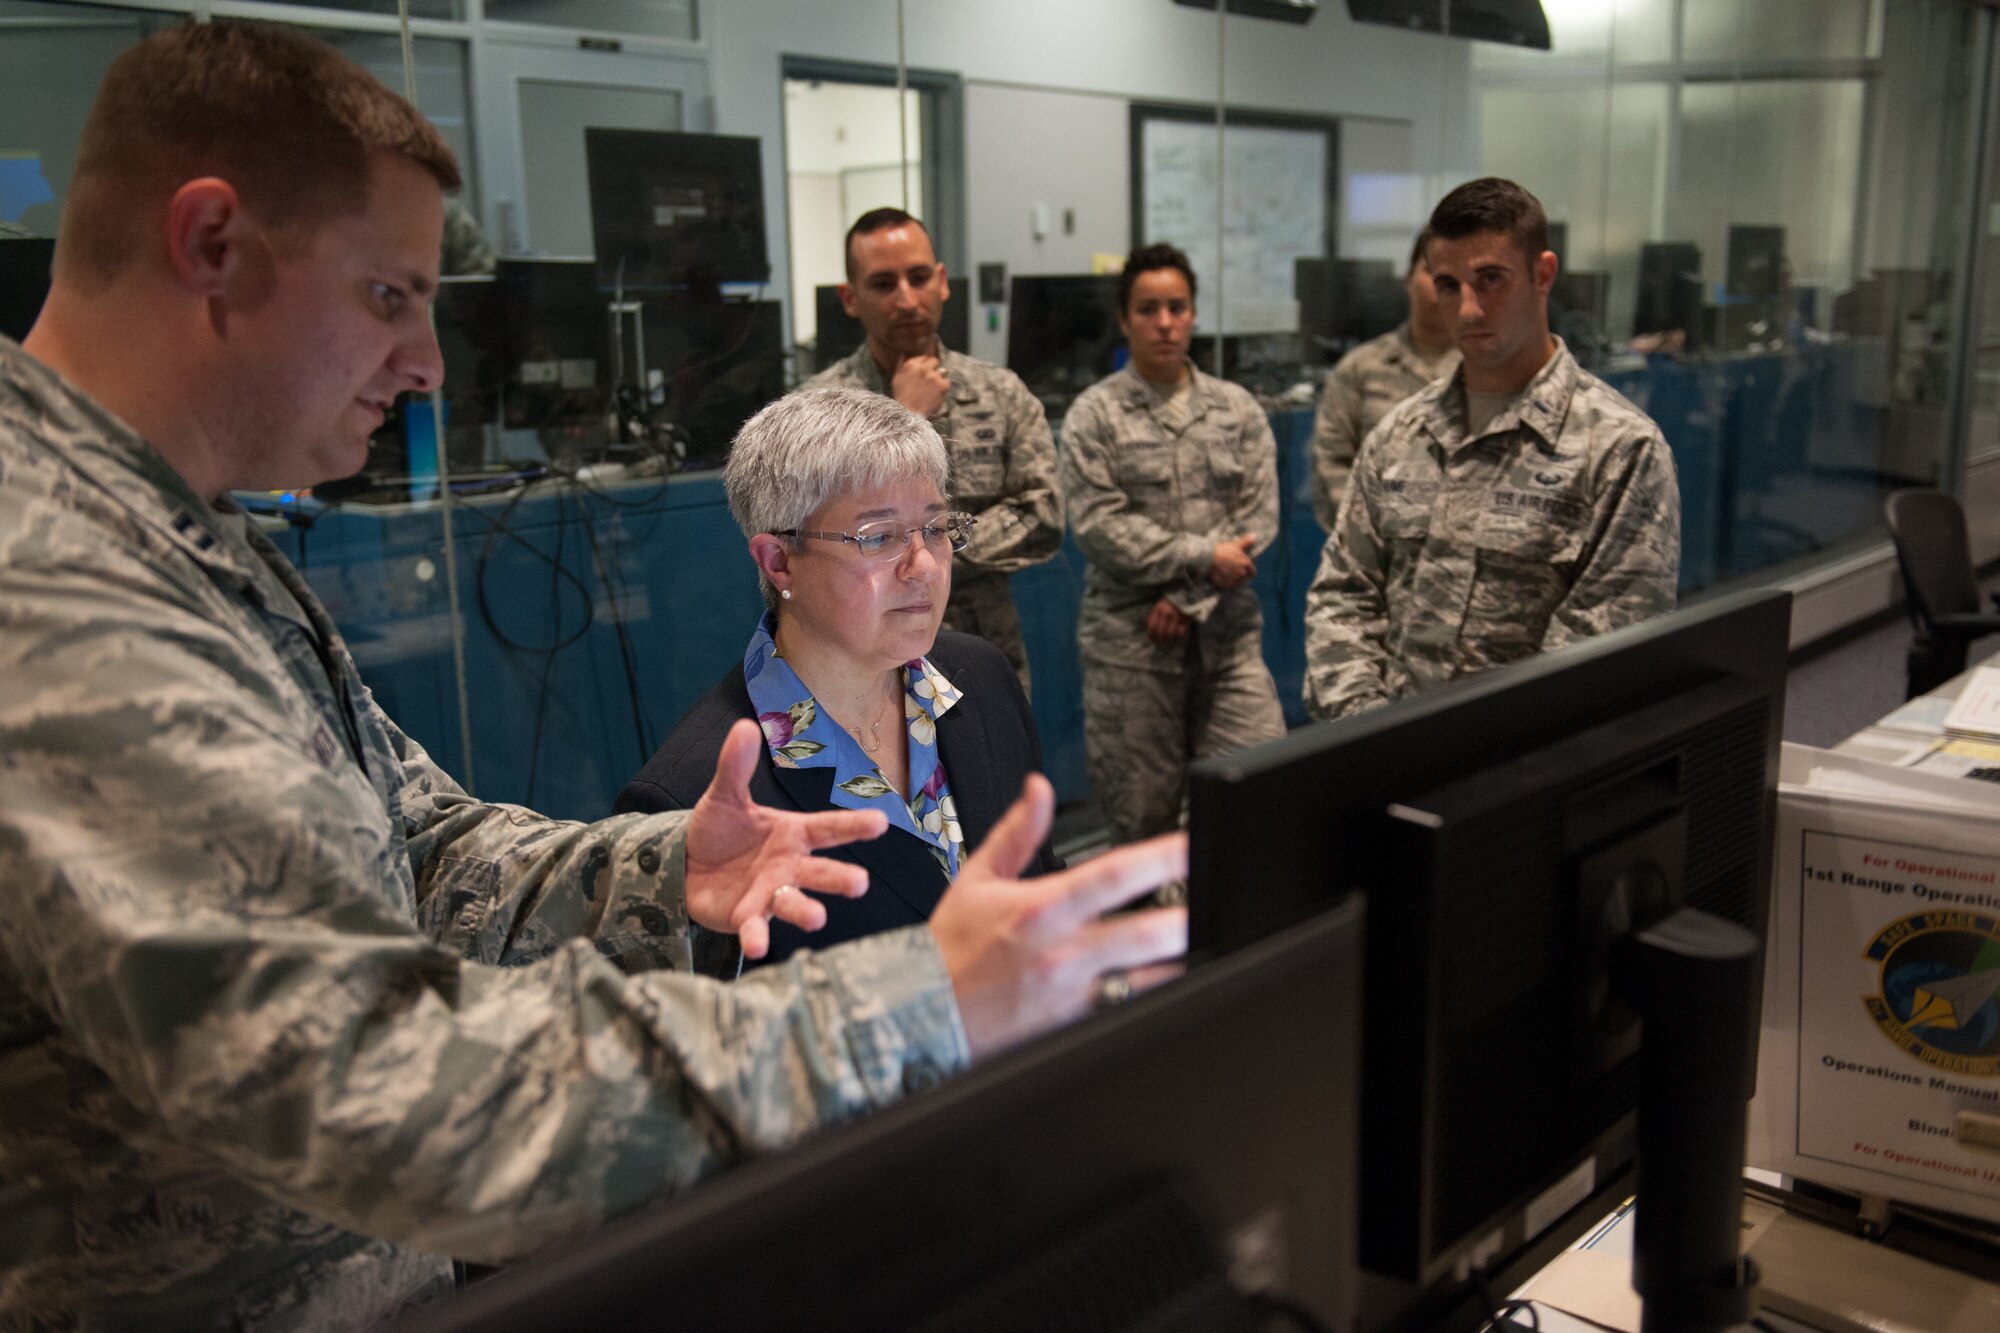 Patricia J. Zarodkiewicz, Administrative Assistant to the Secretary of the Air Force, visited and met with several members of the 45th Space Wing at Cape Canaveral Air Force Station, Fla., Feb. 24, 2016. Zarodkiewicz was introduced to the mission and toured facilities, received mission briefings and learned about the day-to-day operations during her tour. (U.S. Air Force photo/Benjamin Thacker) (Released) 